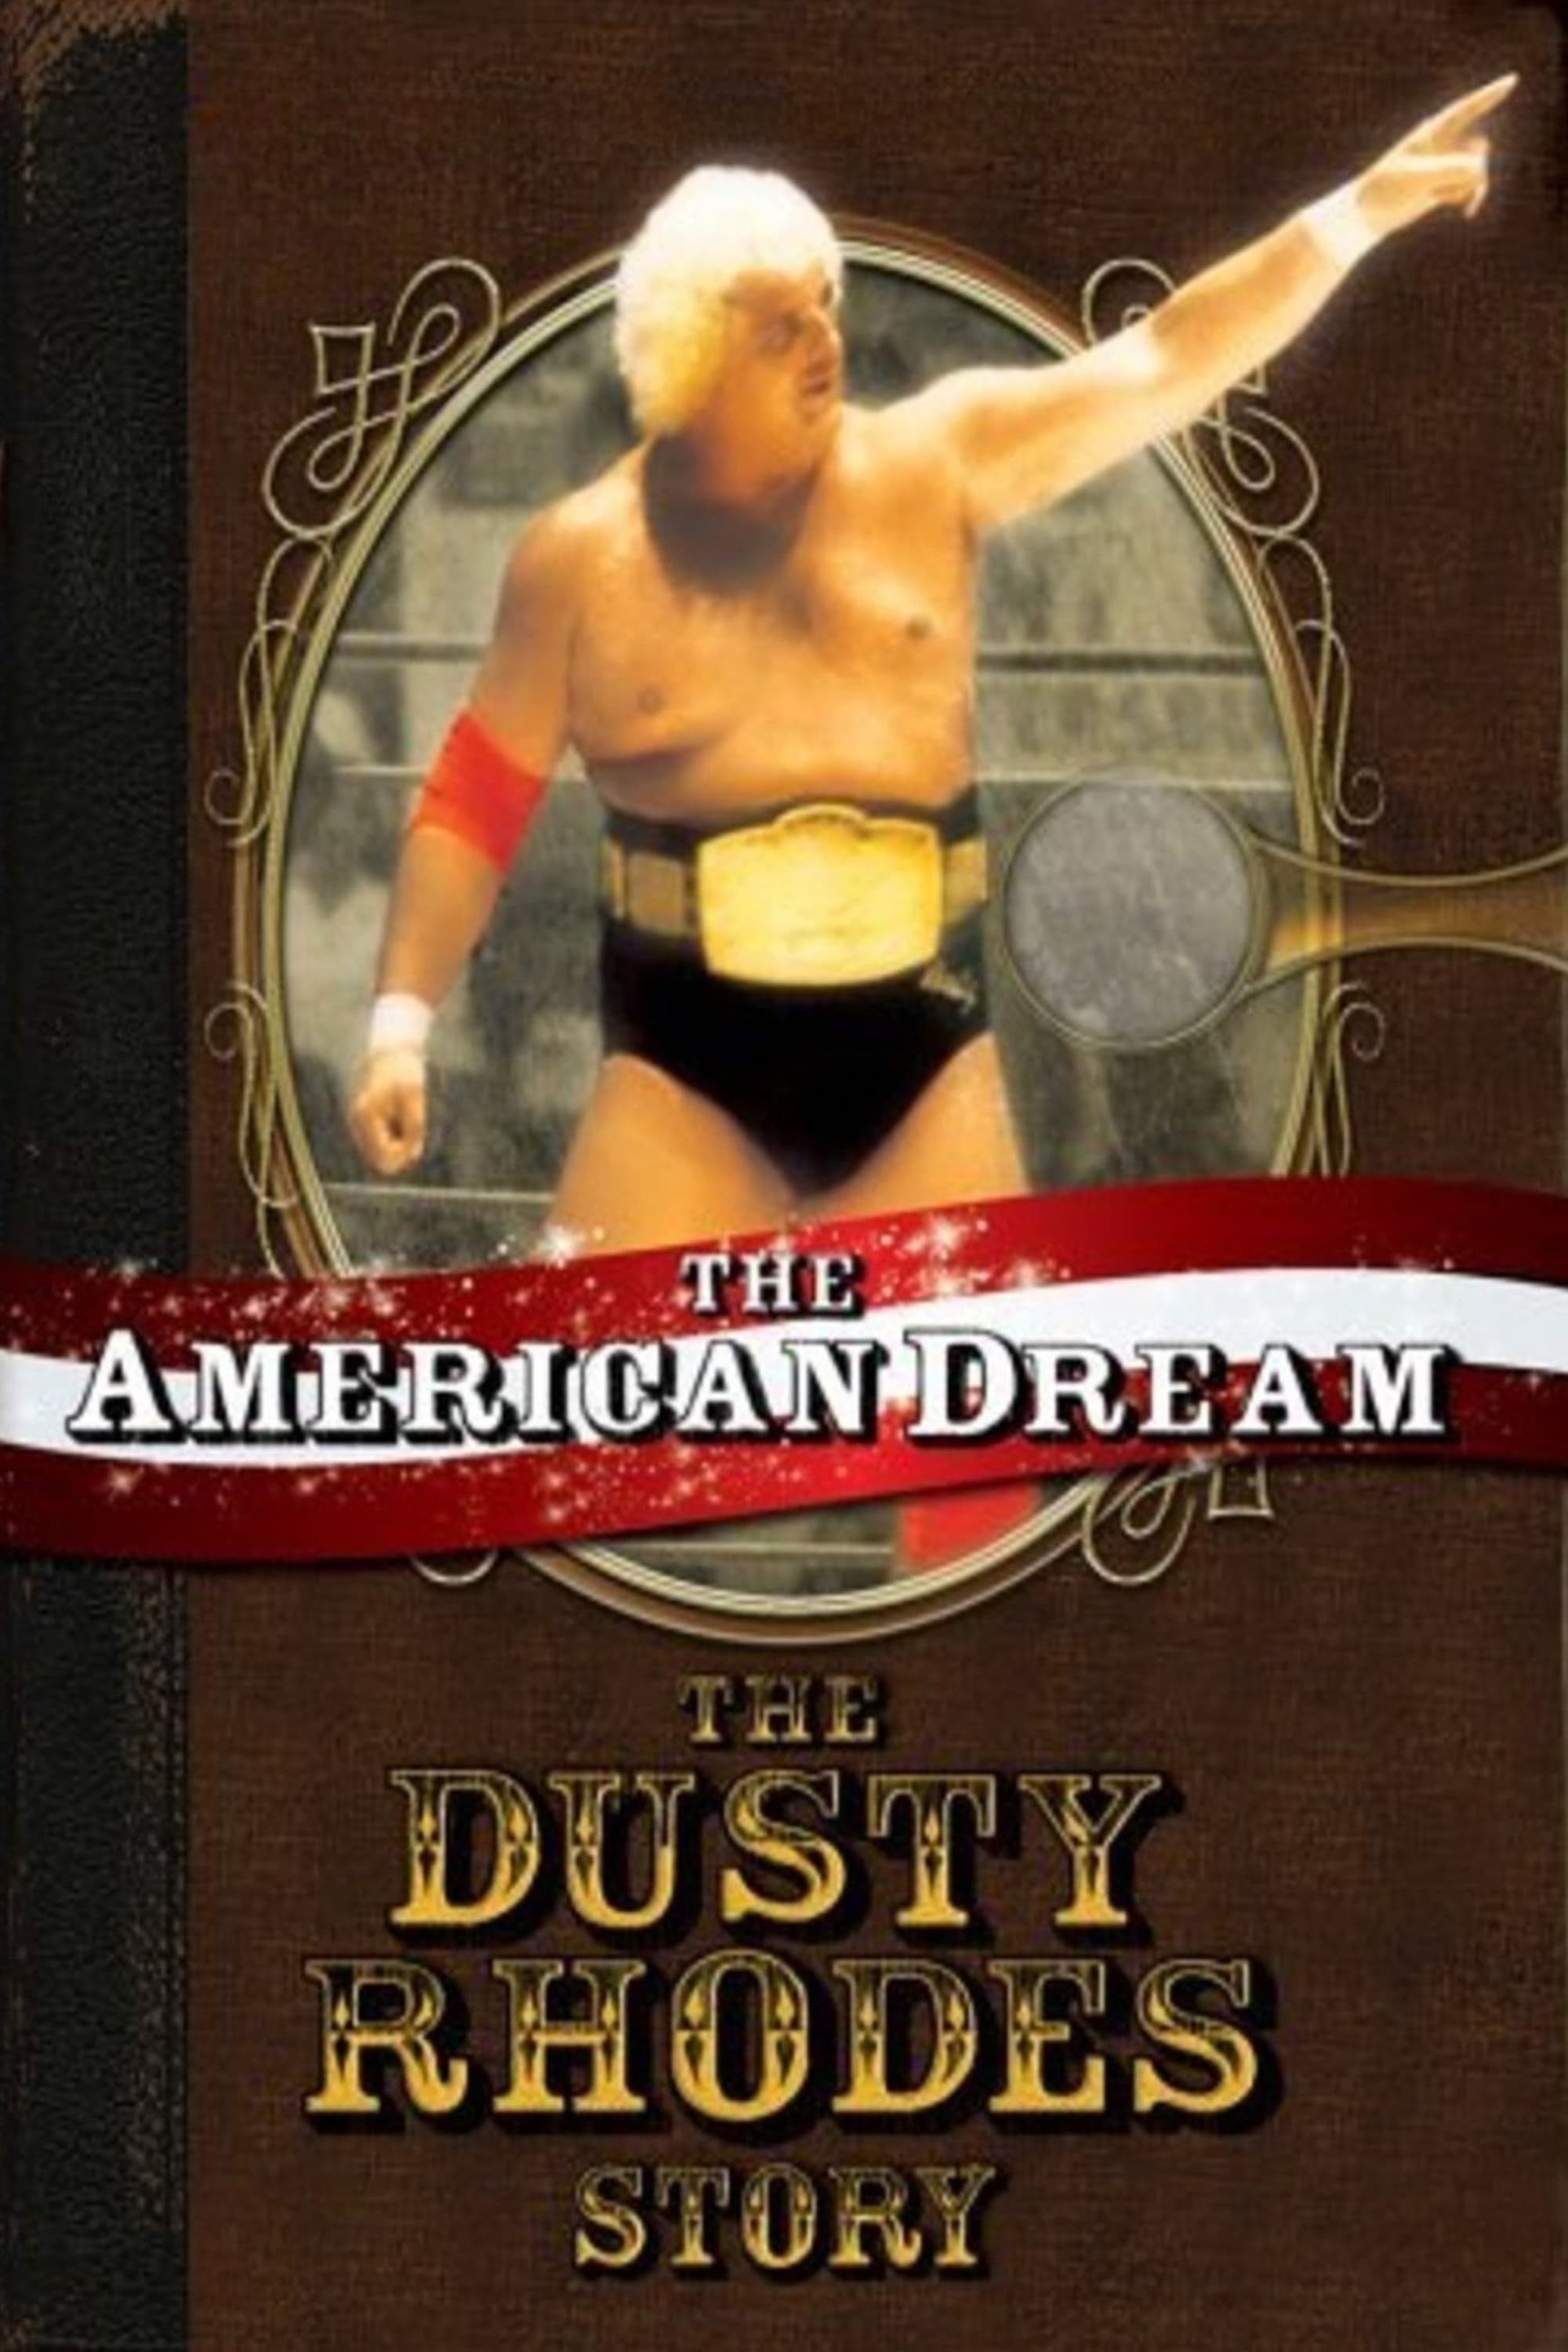 WWE: The American Dream - The Dusty Rhodes Story (2006)